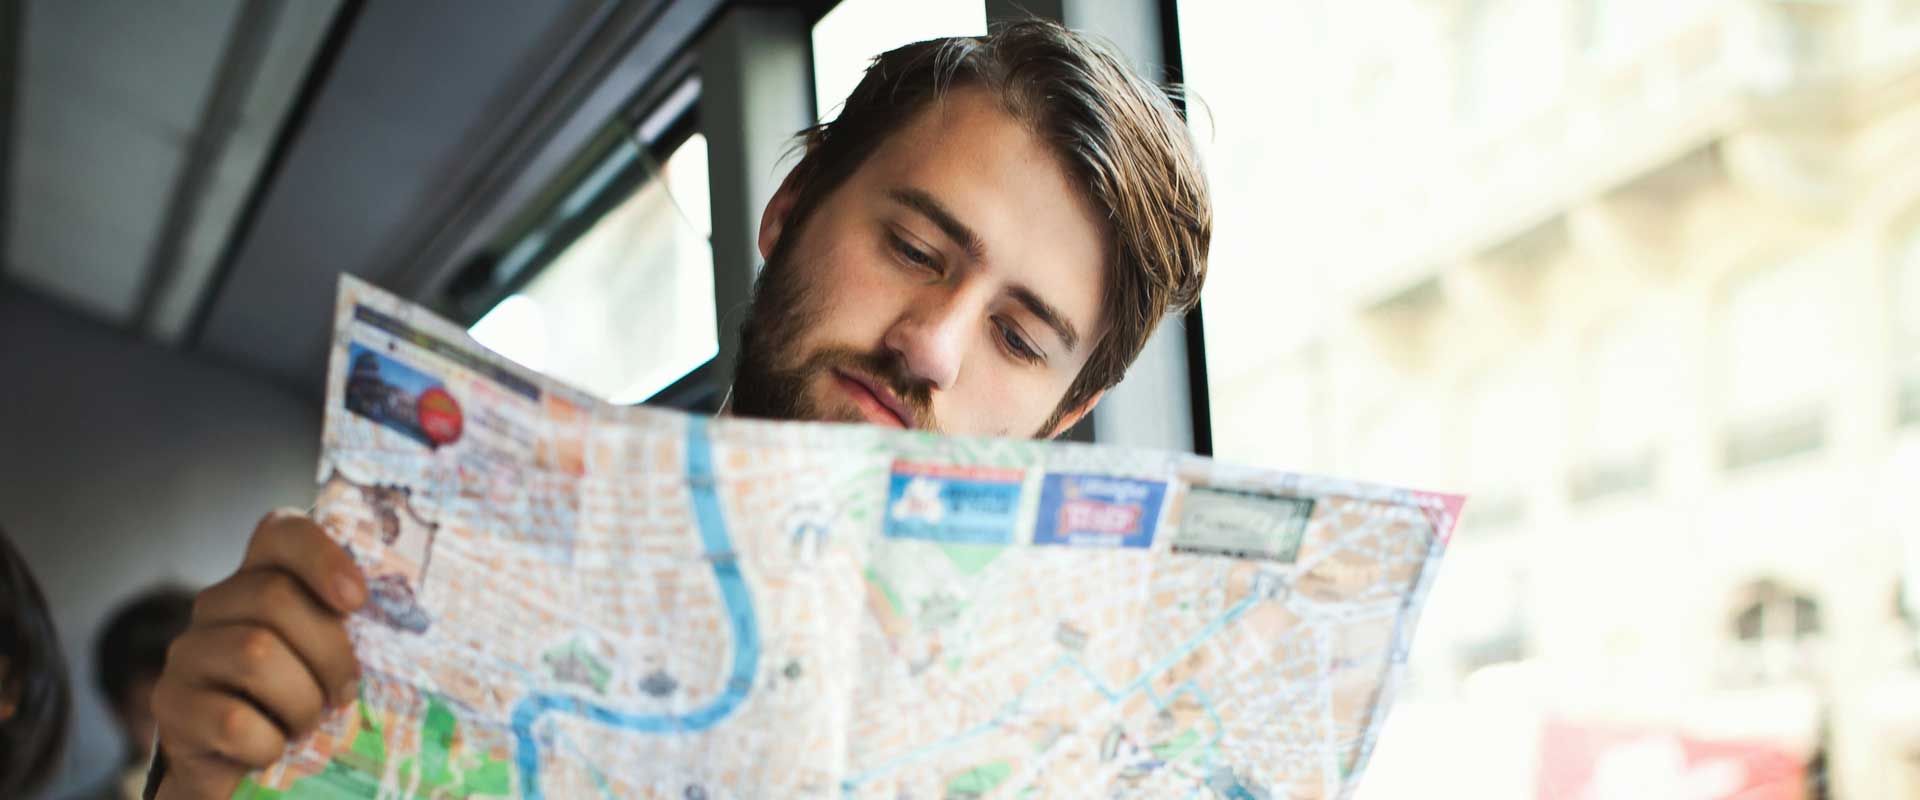 young man sitting on the bus and looking at a map